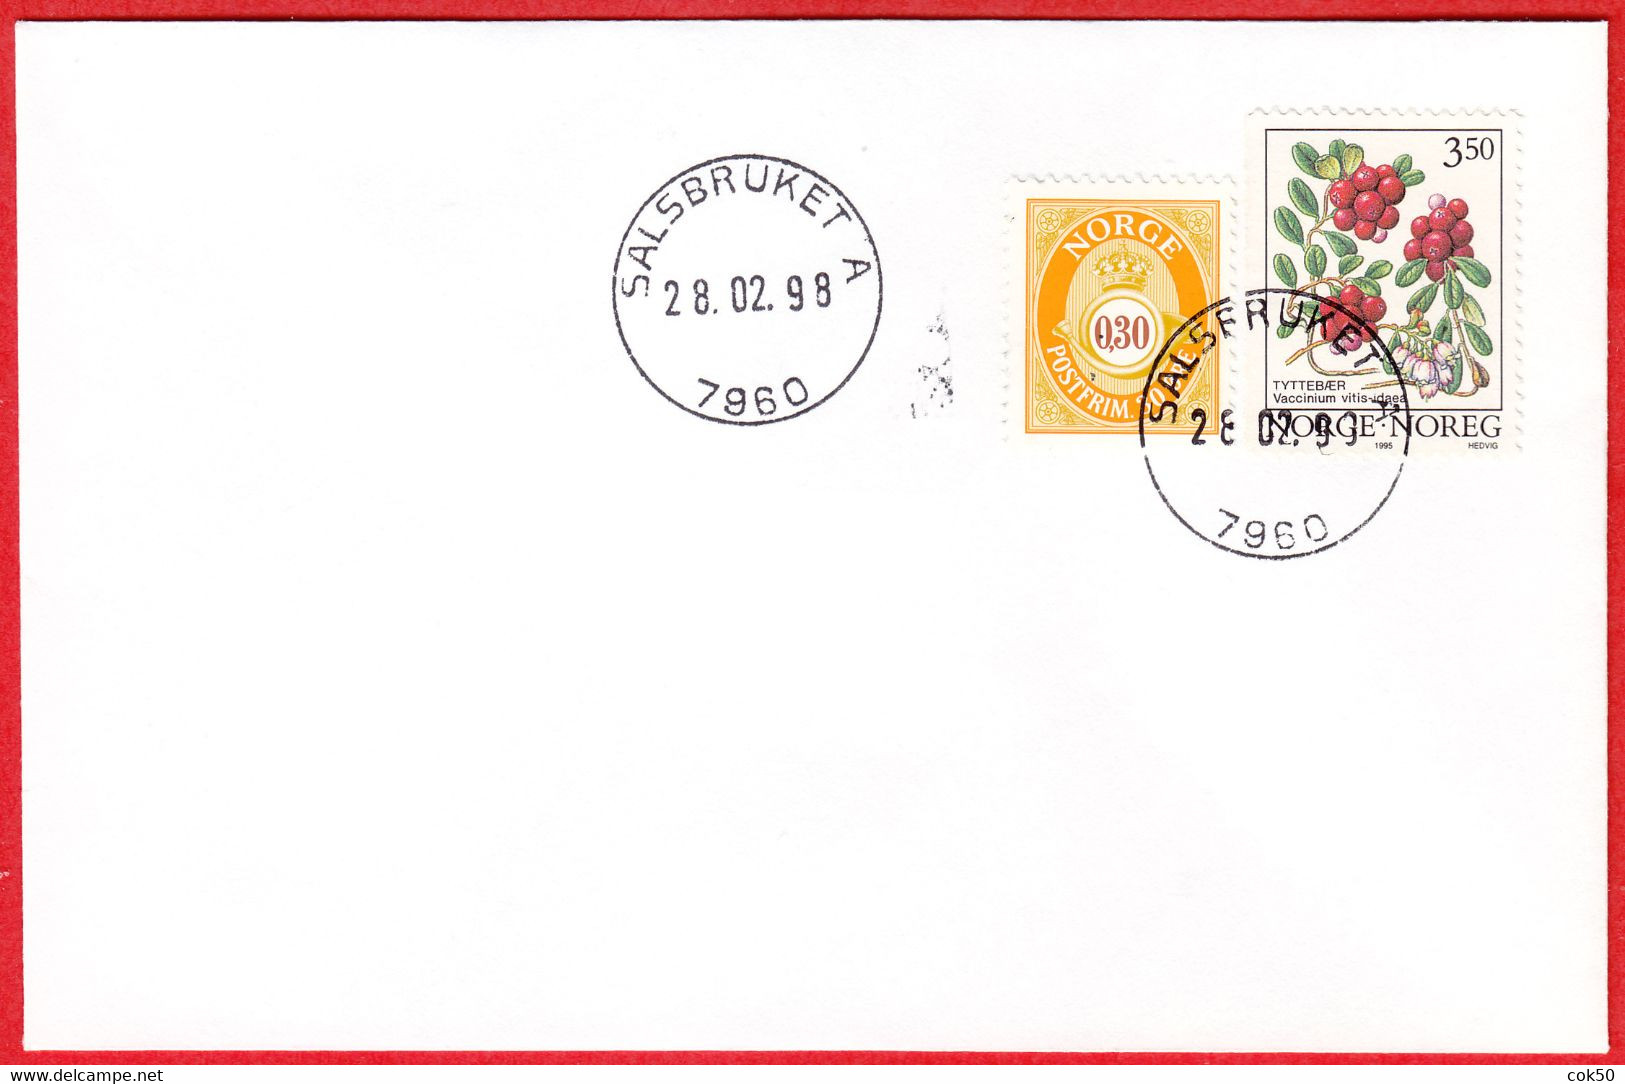 NORWAY -  7960 SALSBRUKET A (Trøndelag County) - Last Day/postoffice Closed On 1998.02.28 - Local Post Stamps